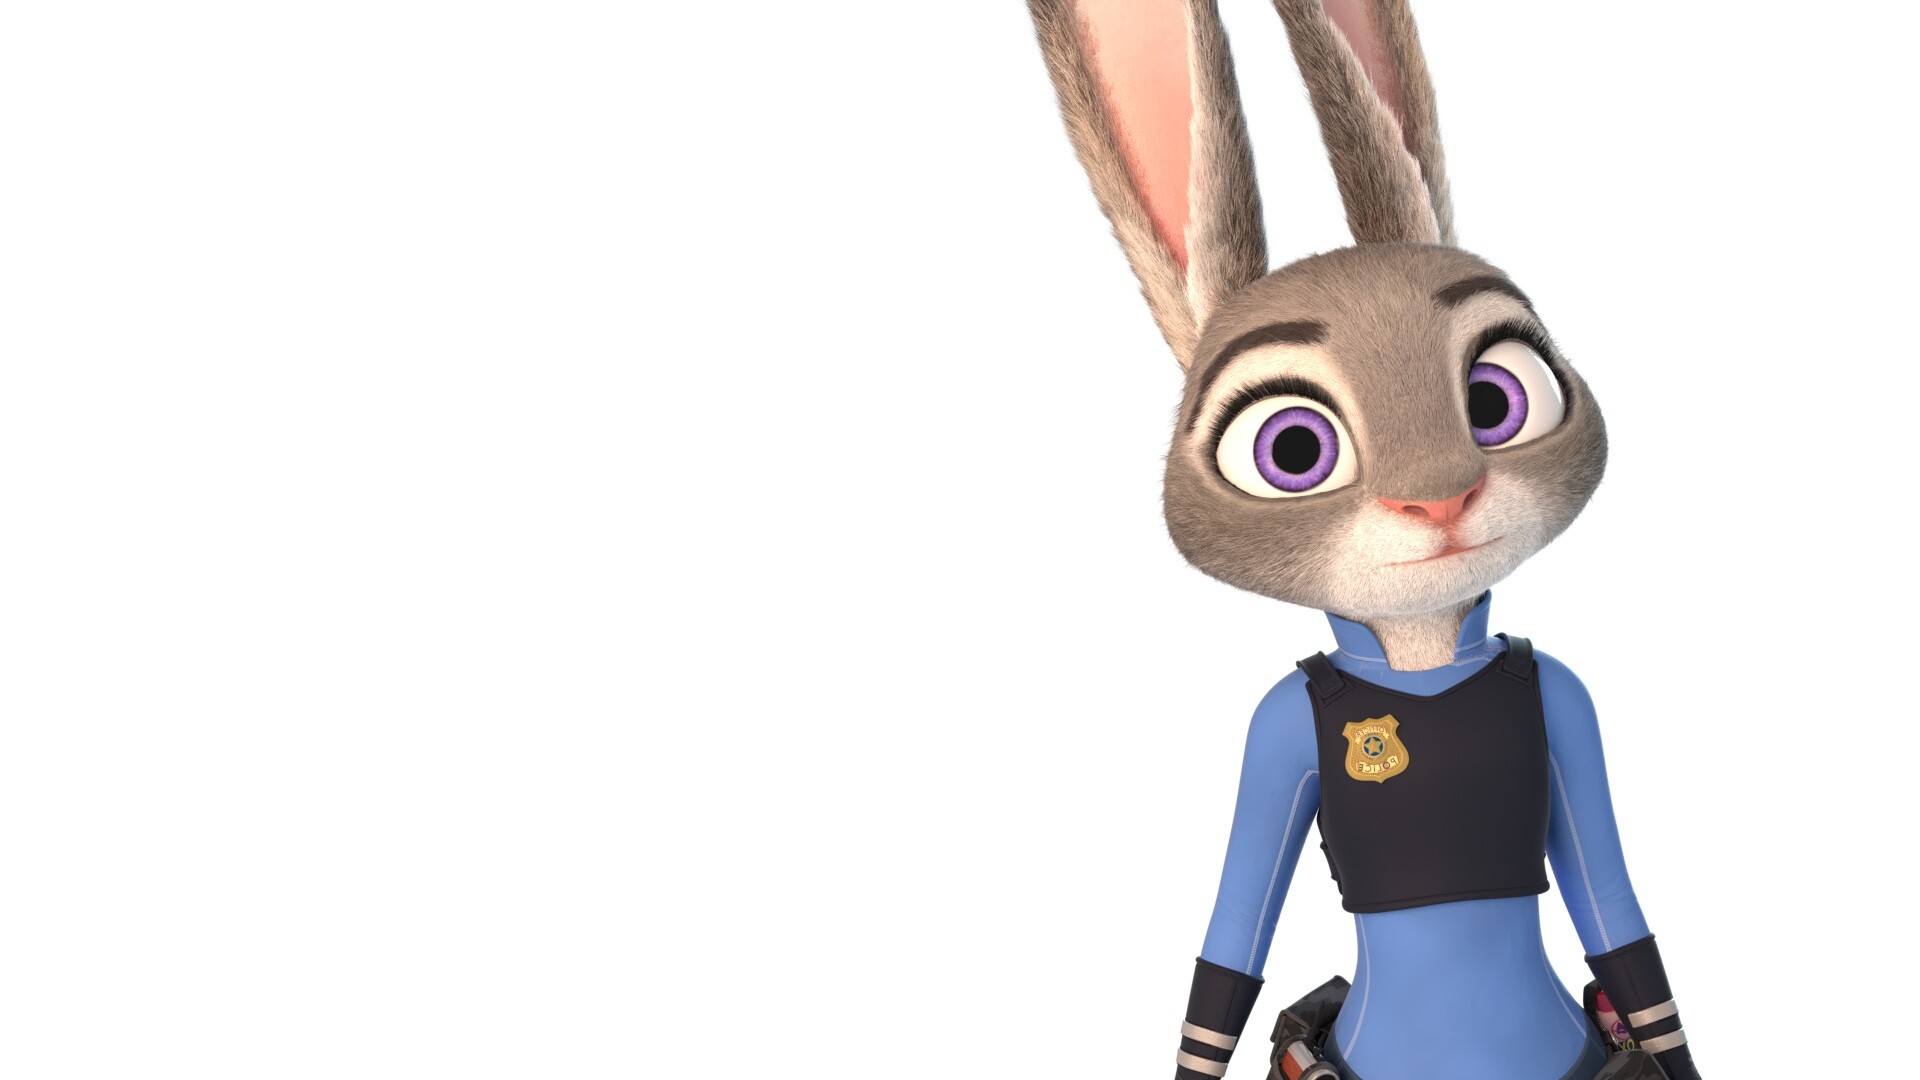 Zootopia: A family animation movie from Disney about a young bunny determined to be a cop at all costs – in a land where only 'predators' are cops, she would be the first ‘prey’ cop. 1920x1080 Full HD Background.